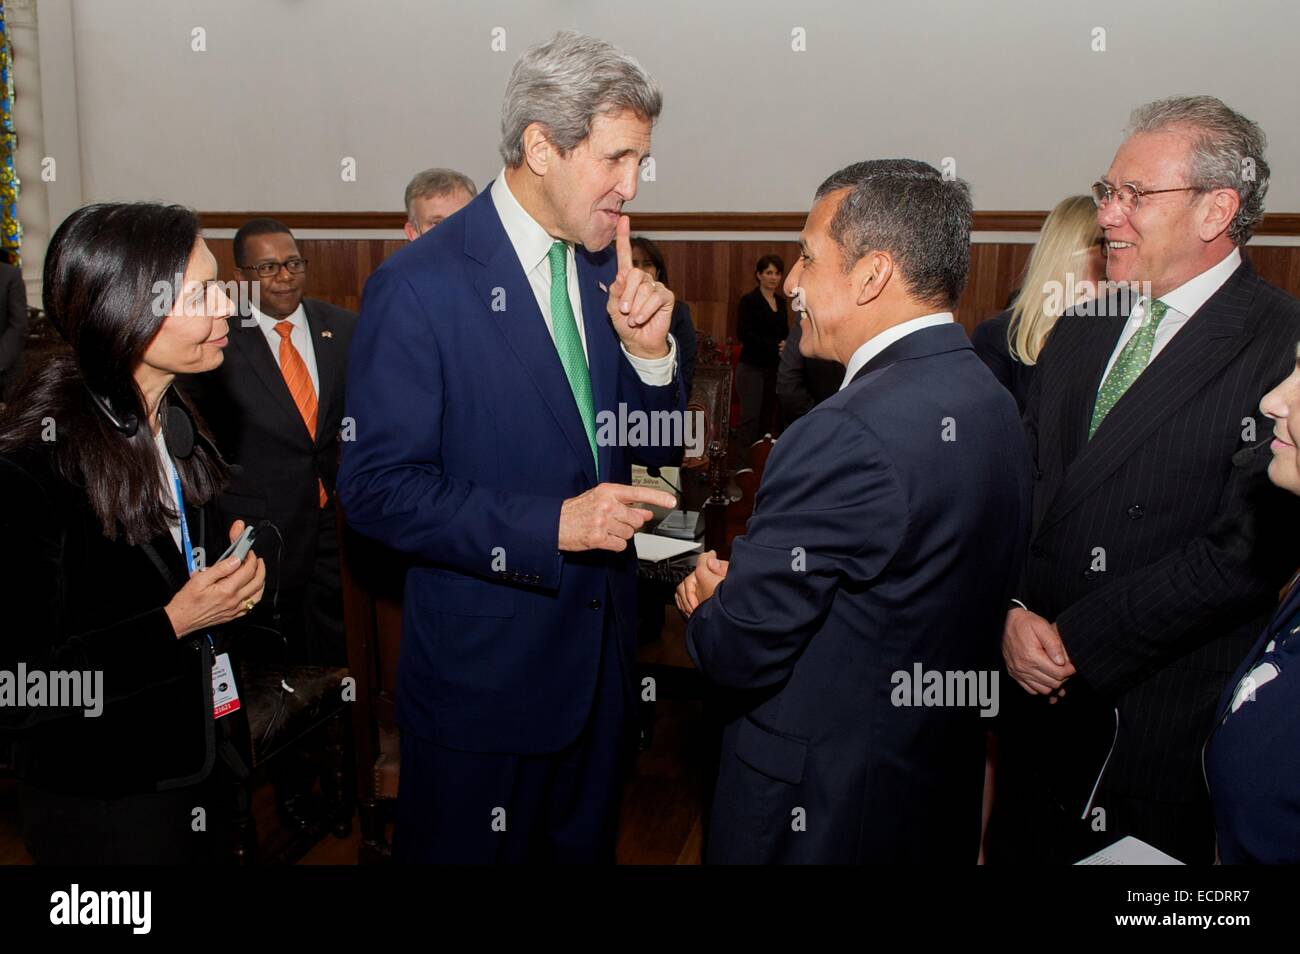 US Secretary of State John Kerry jokingly tells President Ollanta Humala of Peru not to mention his age after the President congratulated him on his 71st birthday before their bilateral meeting December 11, 2014 in Lima, Peru. Stock Photo